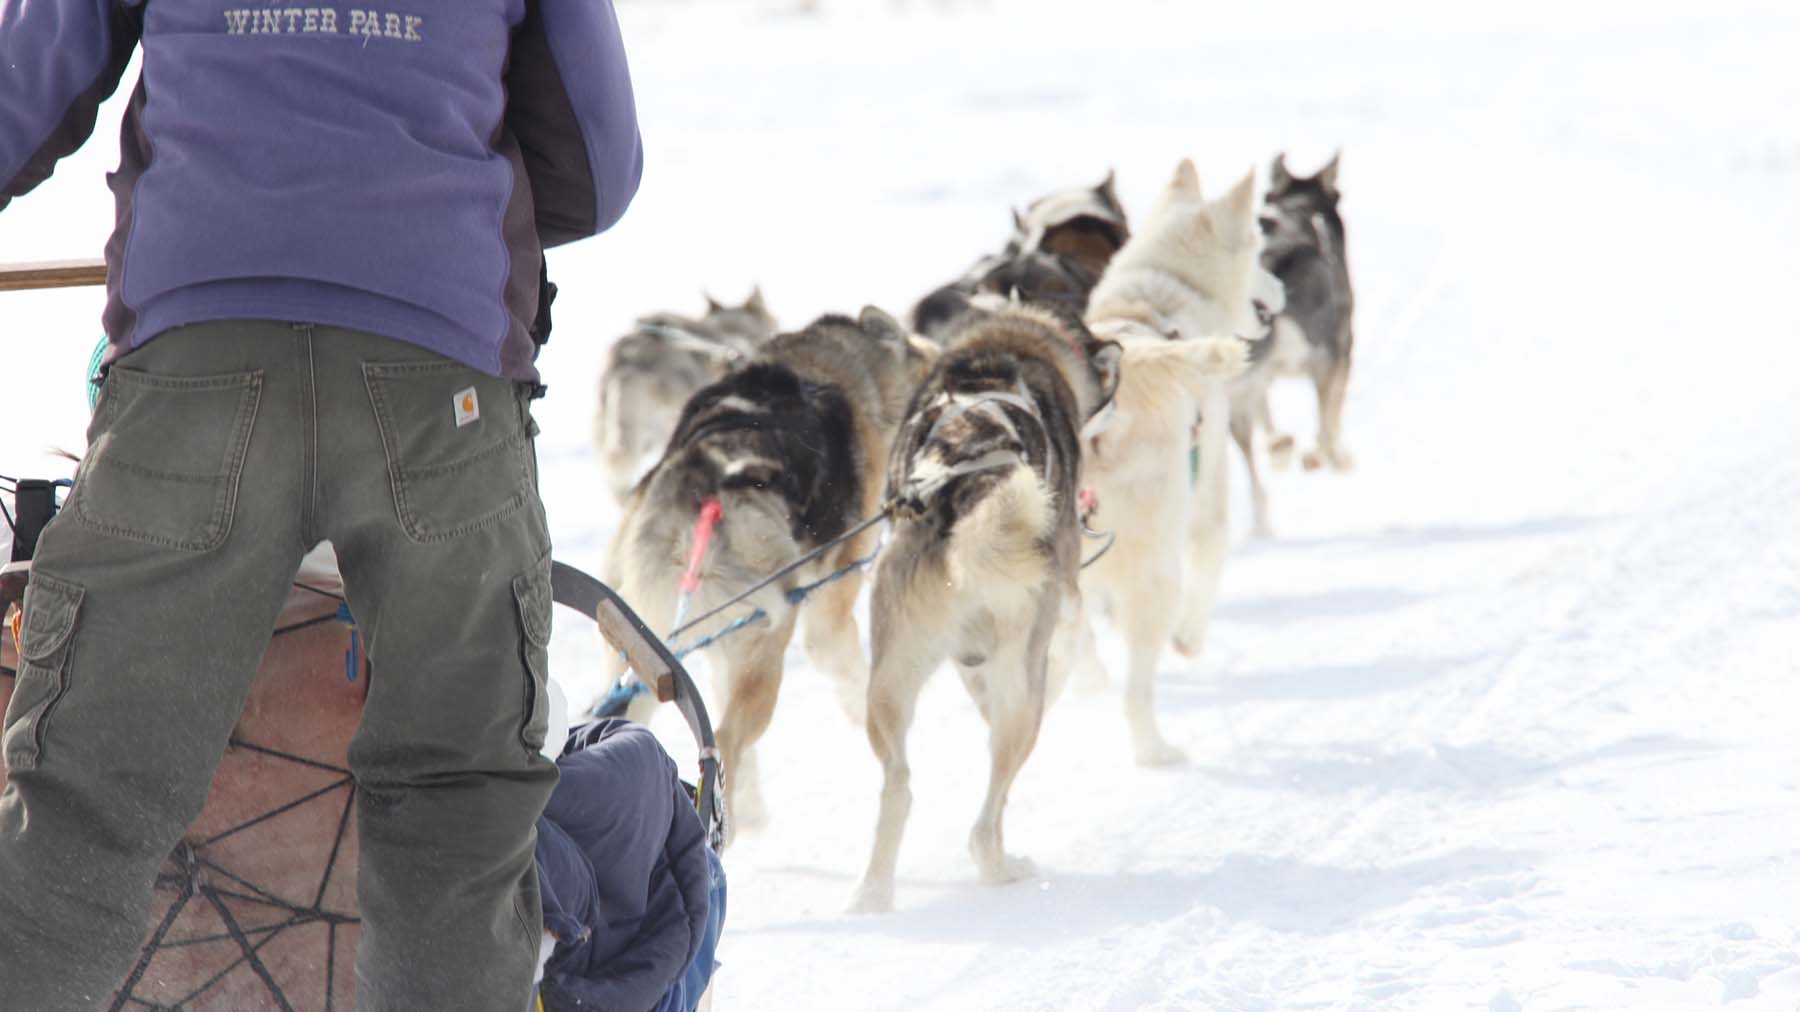 Dog Sled Rides in the town of Winter Park